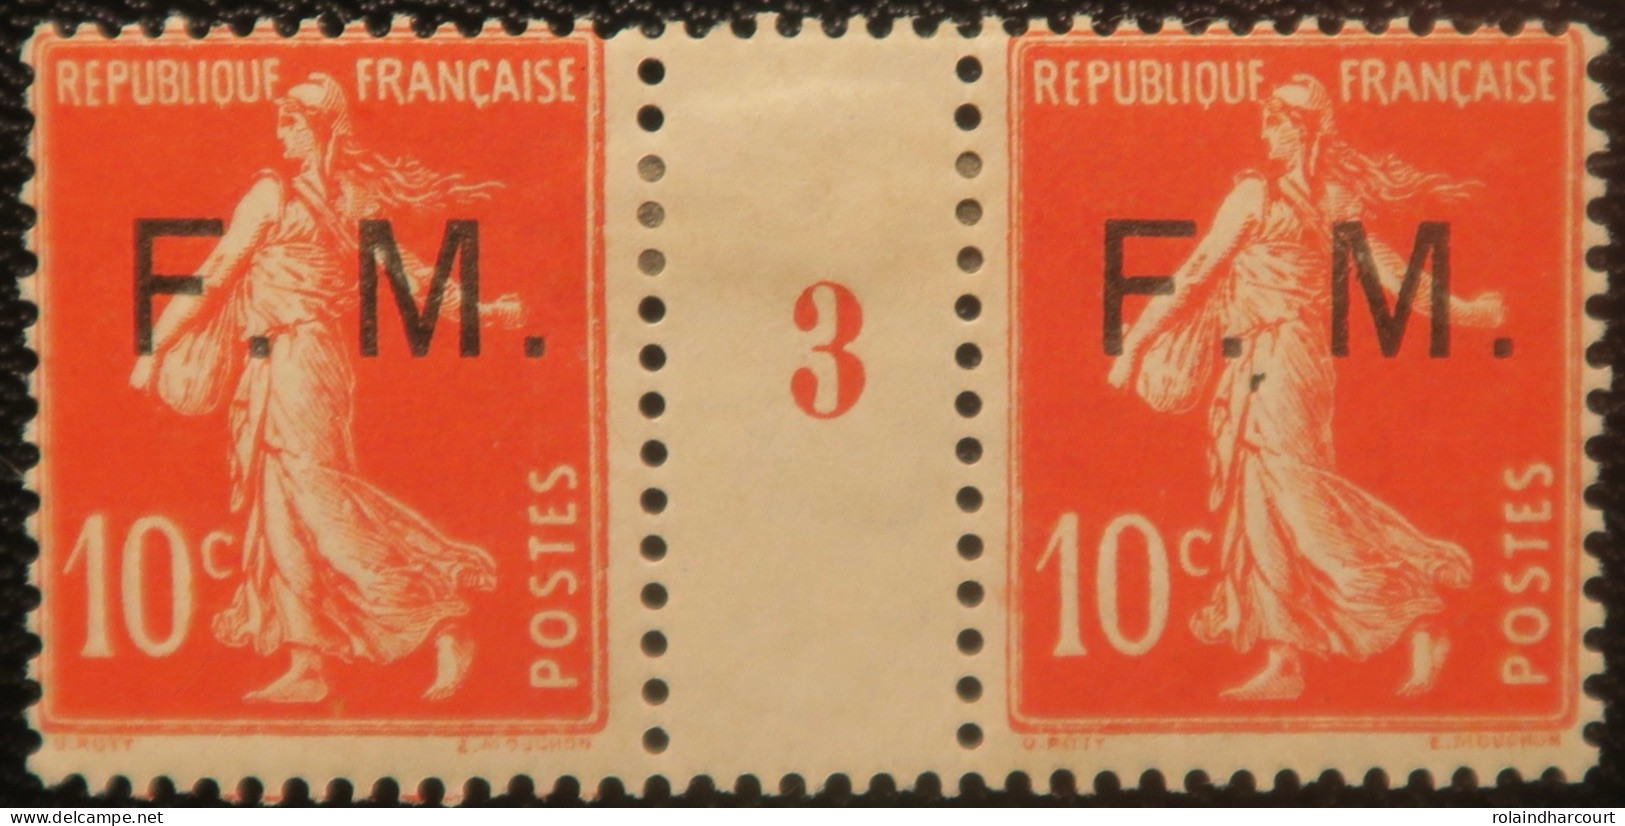 LP2943/83 - FRANCE - 1913 - TYPE SEMEUSE CAMEE - F.M. - N°5 Mill 3 TIMBRES NEUFS* - Millésime